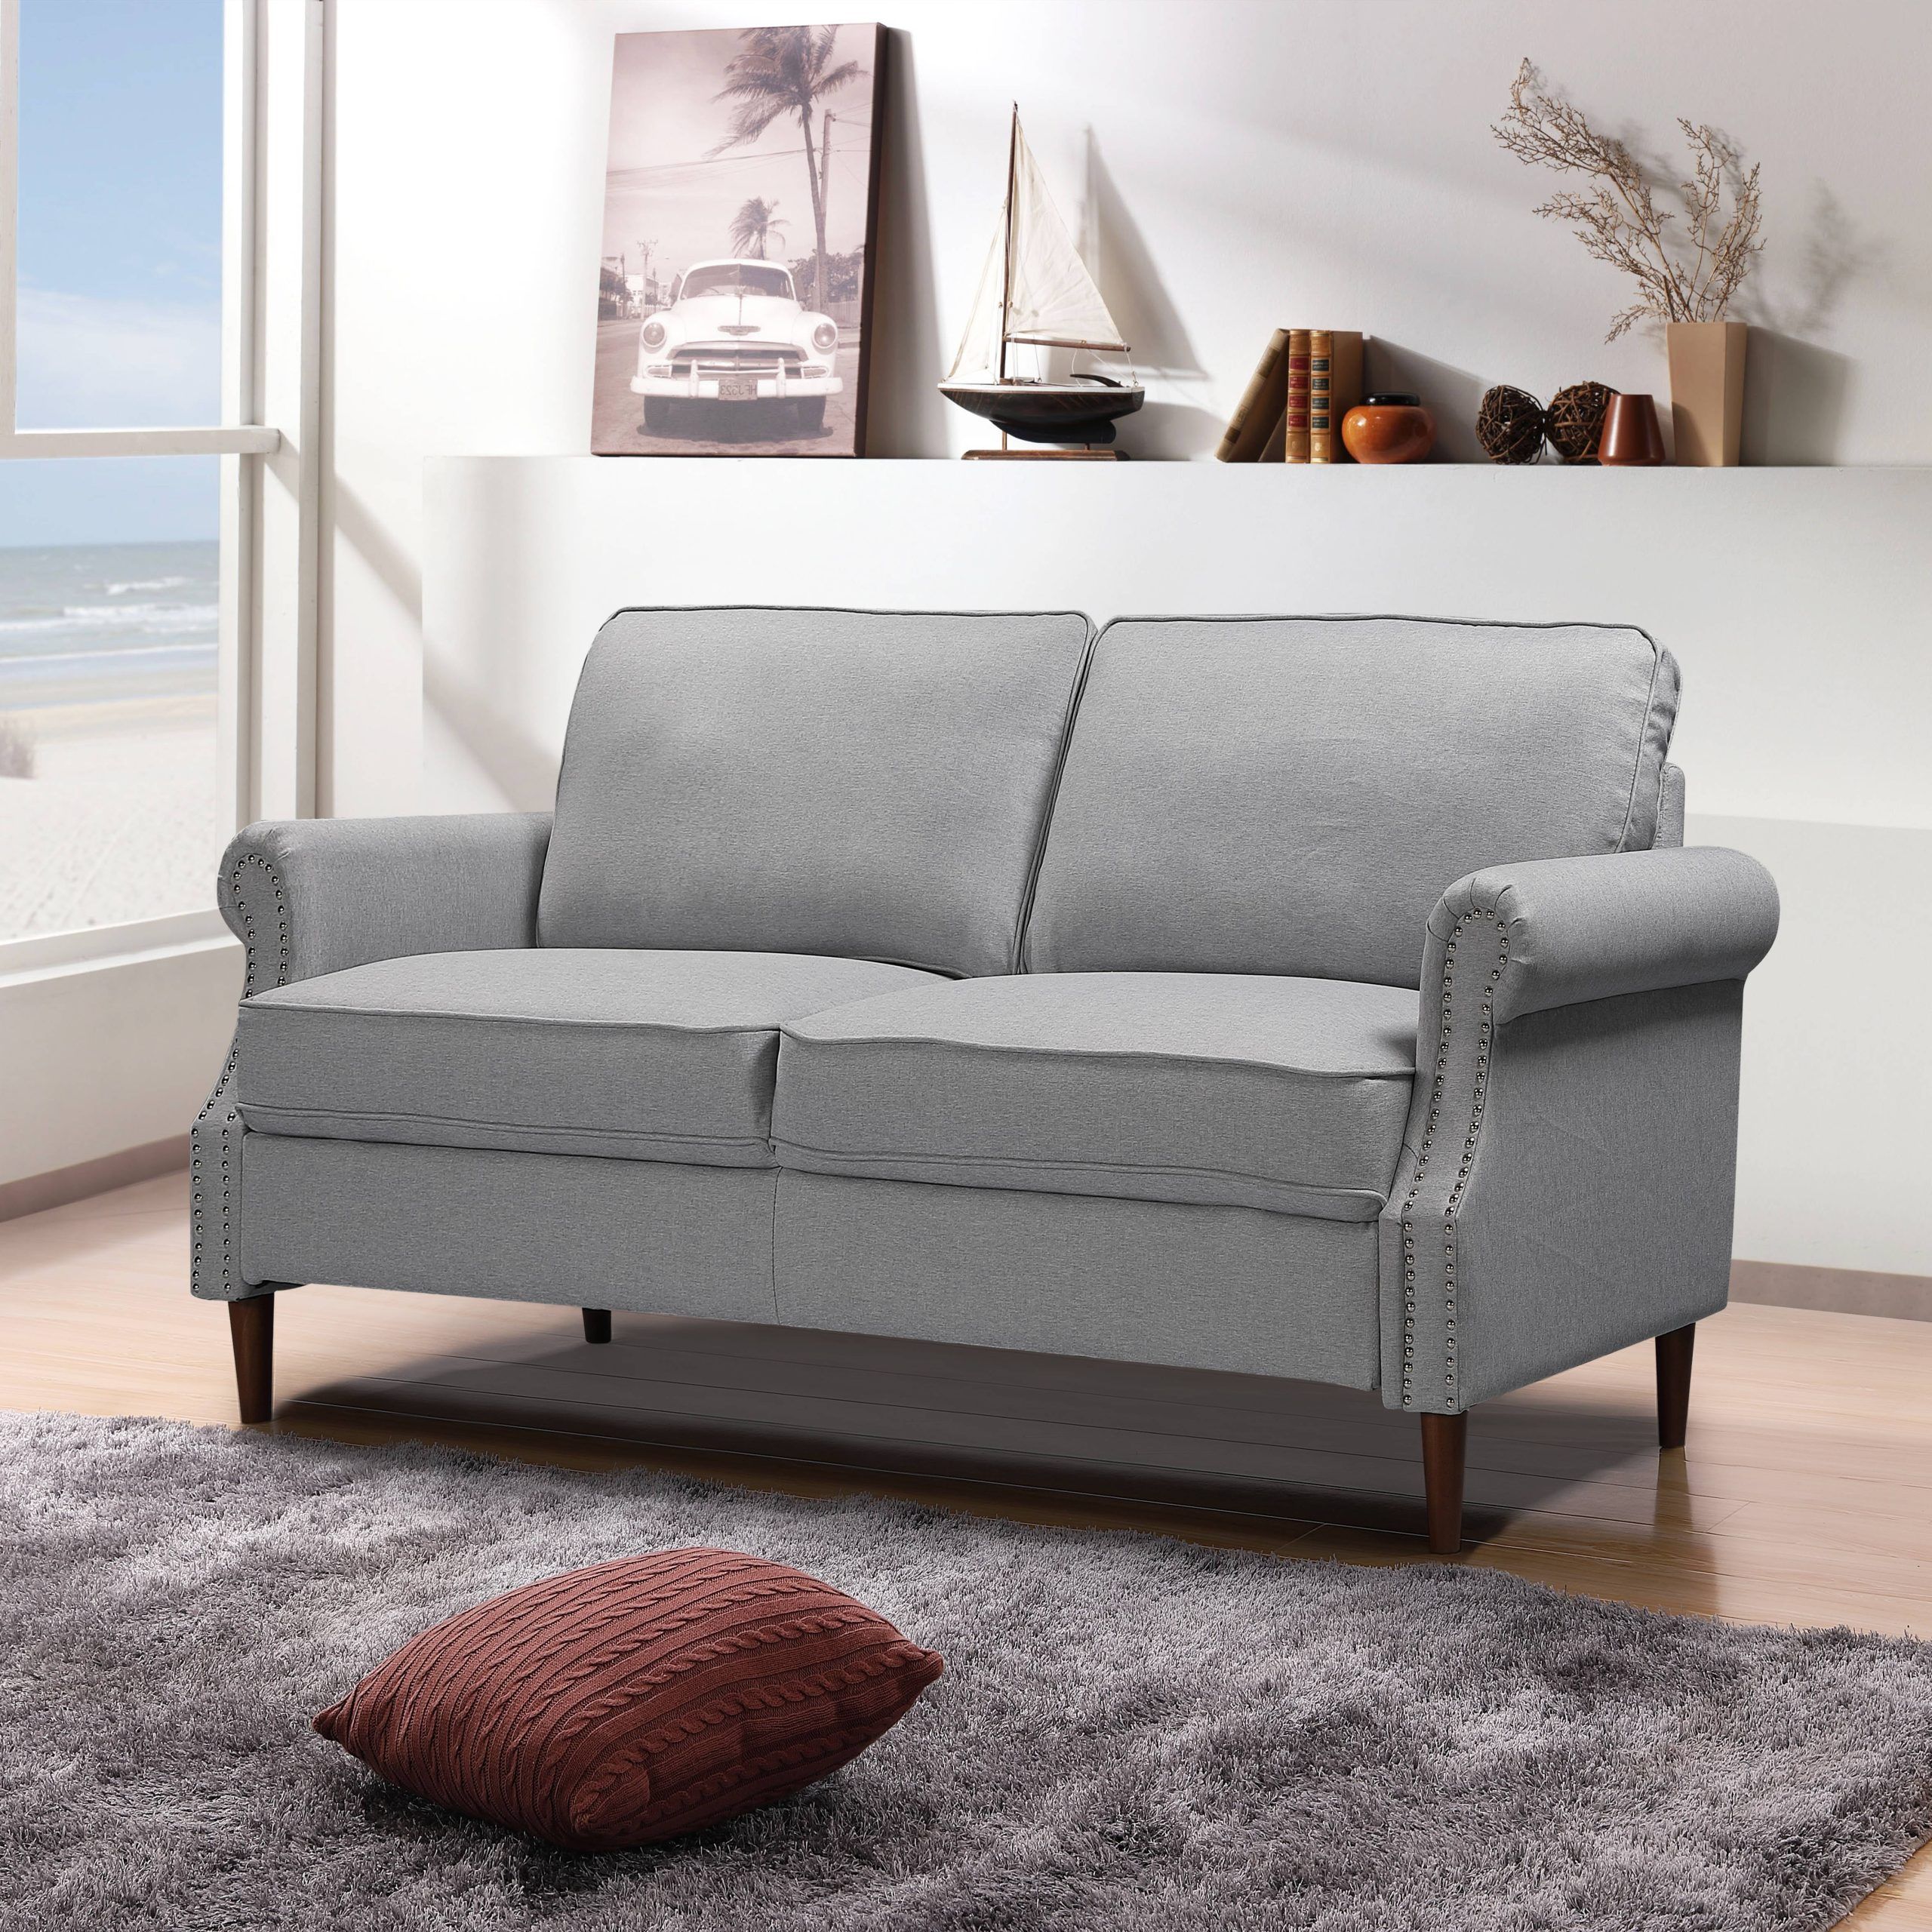 Gray Loveseat, Modern Linen Farbic Sofas For Small Spaces, Upholstered Within Sofas For Small Spaces (Gallery 12 of 20)